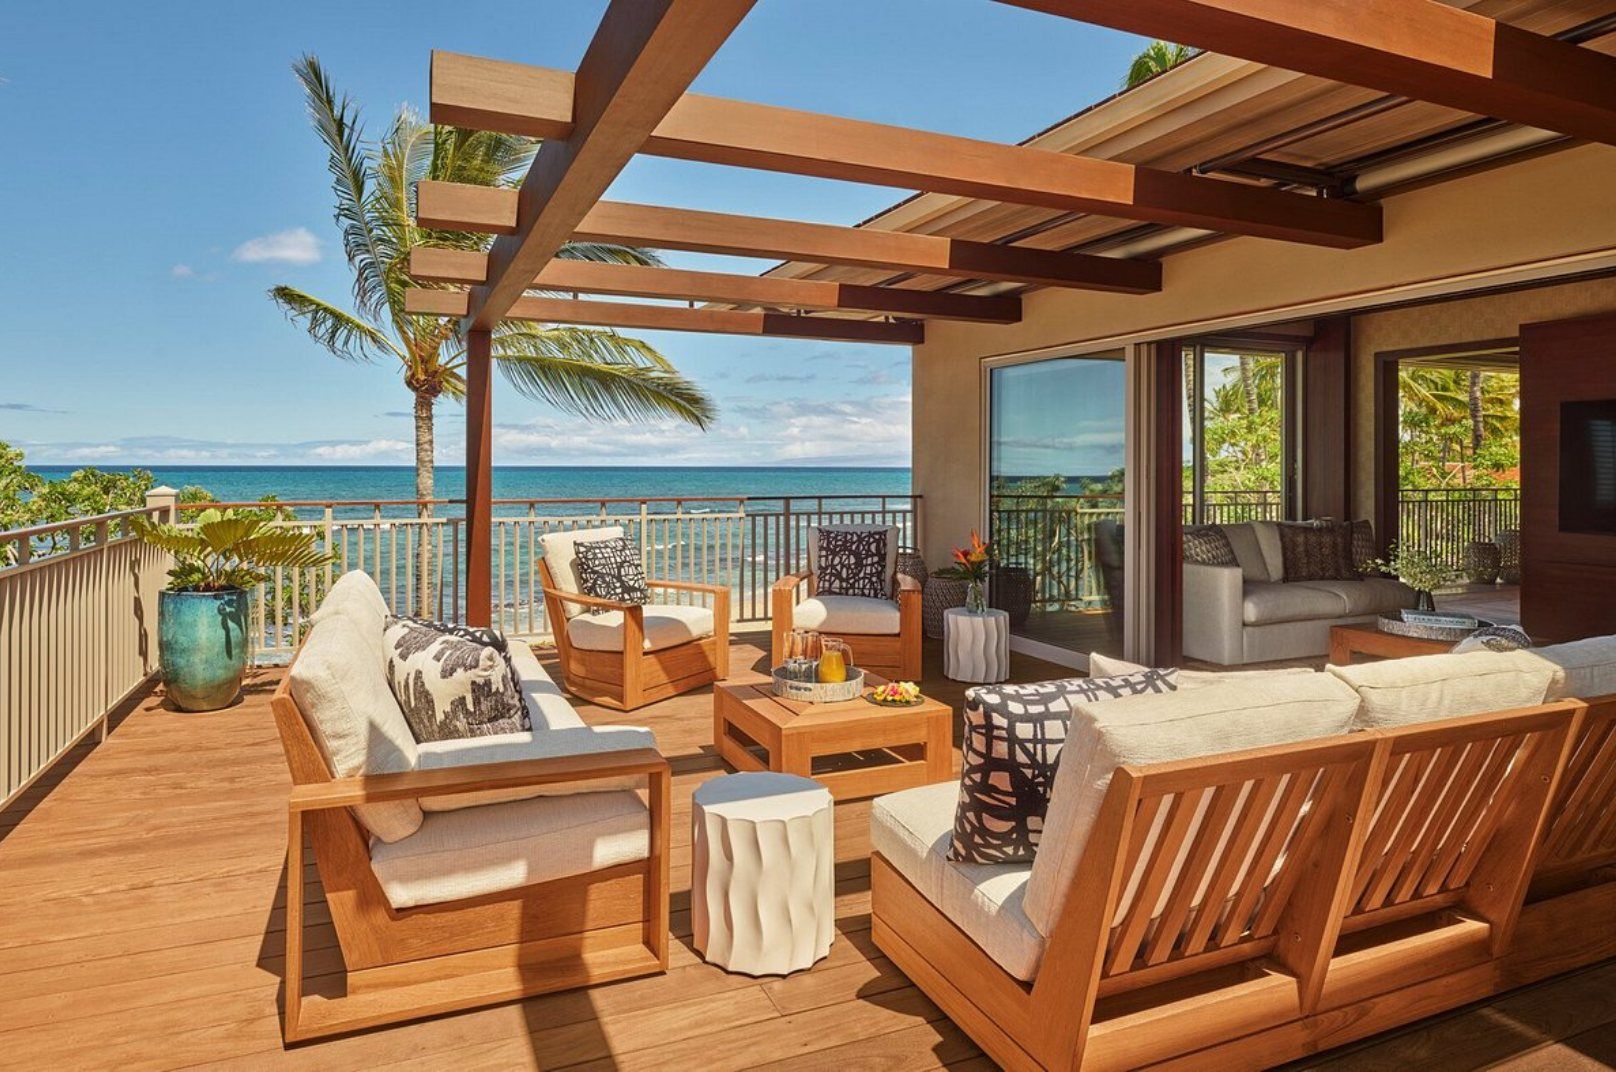 The Best Hotels on the Big Island of Hawaii